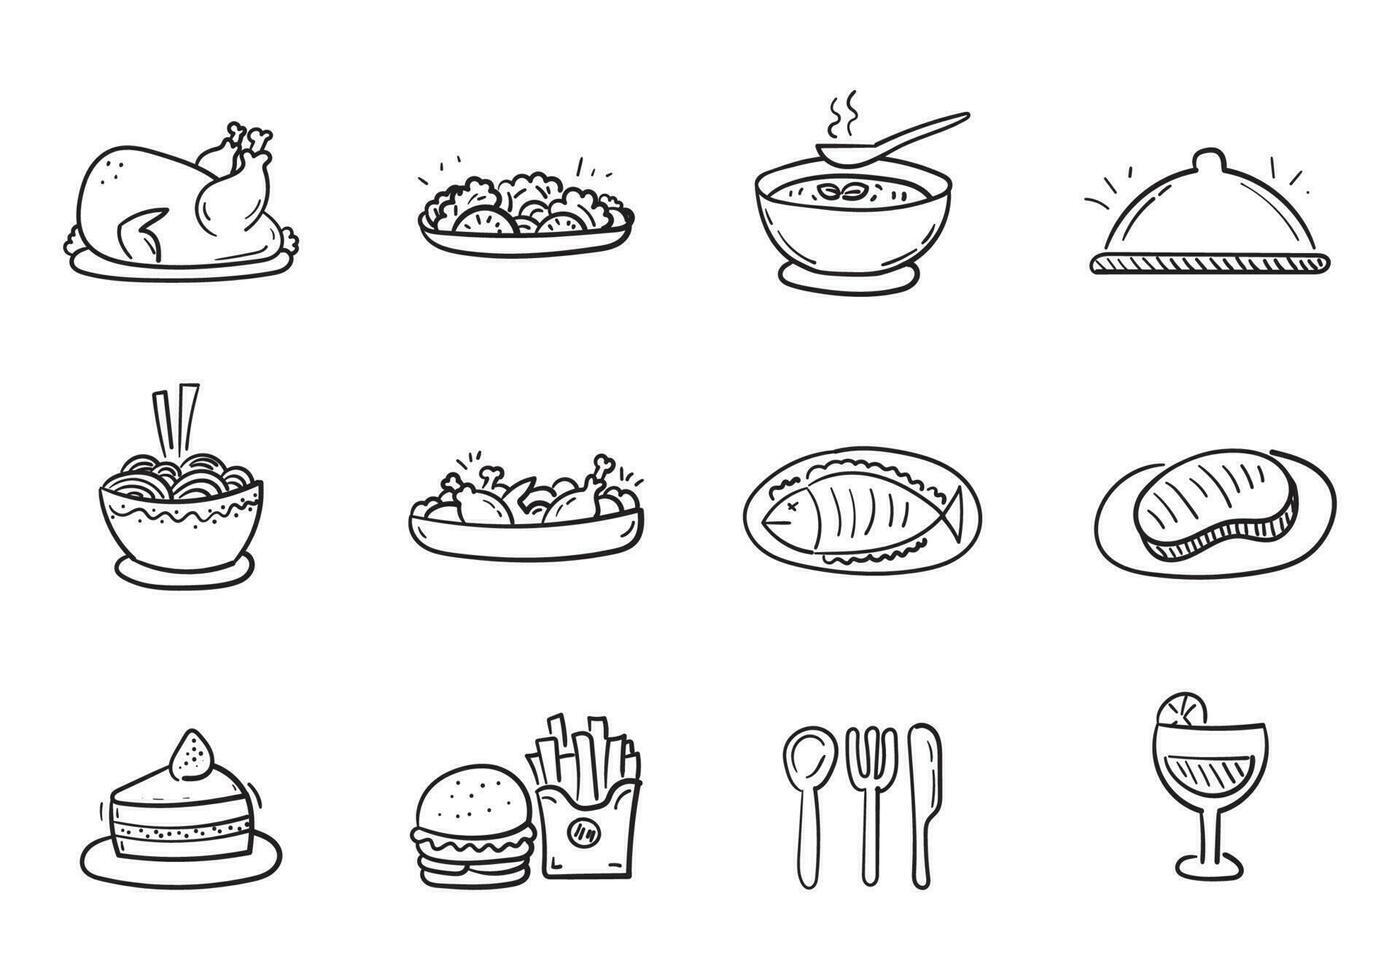 Set of foods vector illustration in cute doodle style isolated on white background